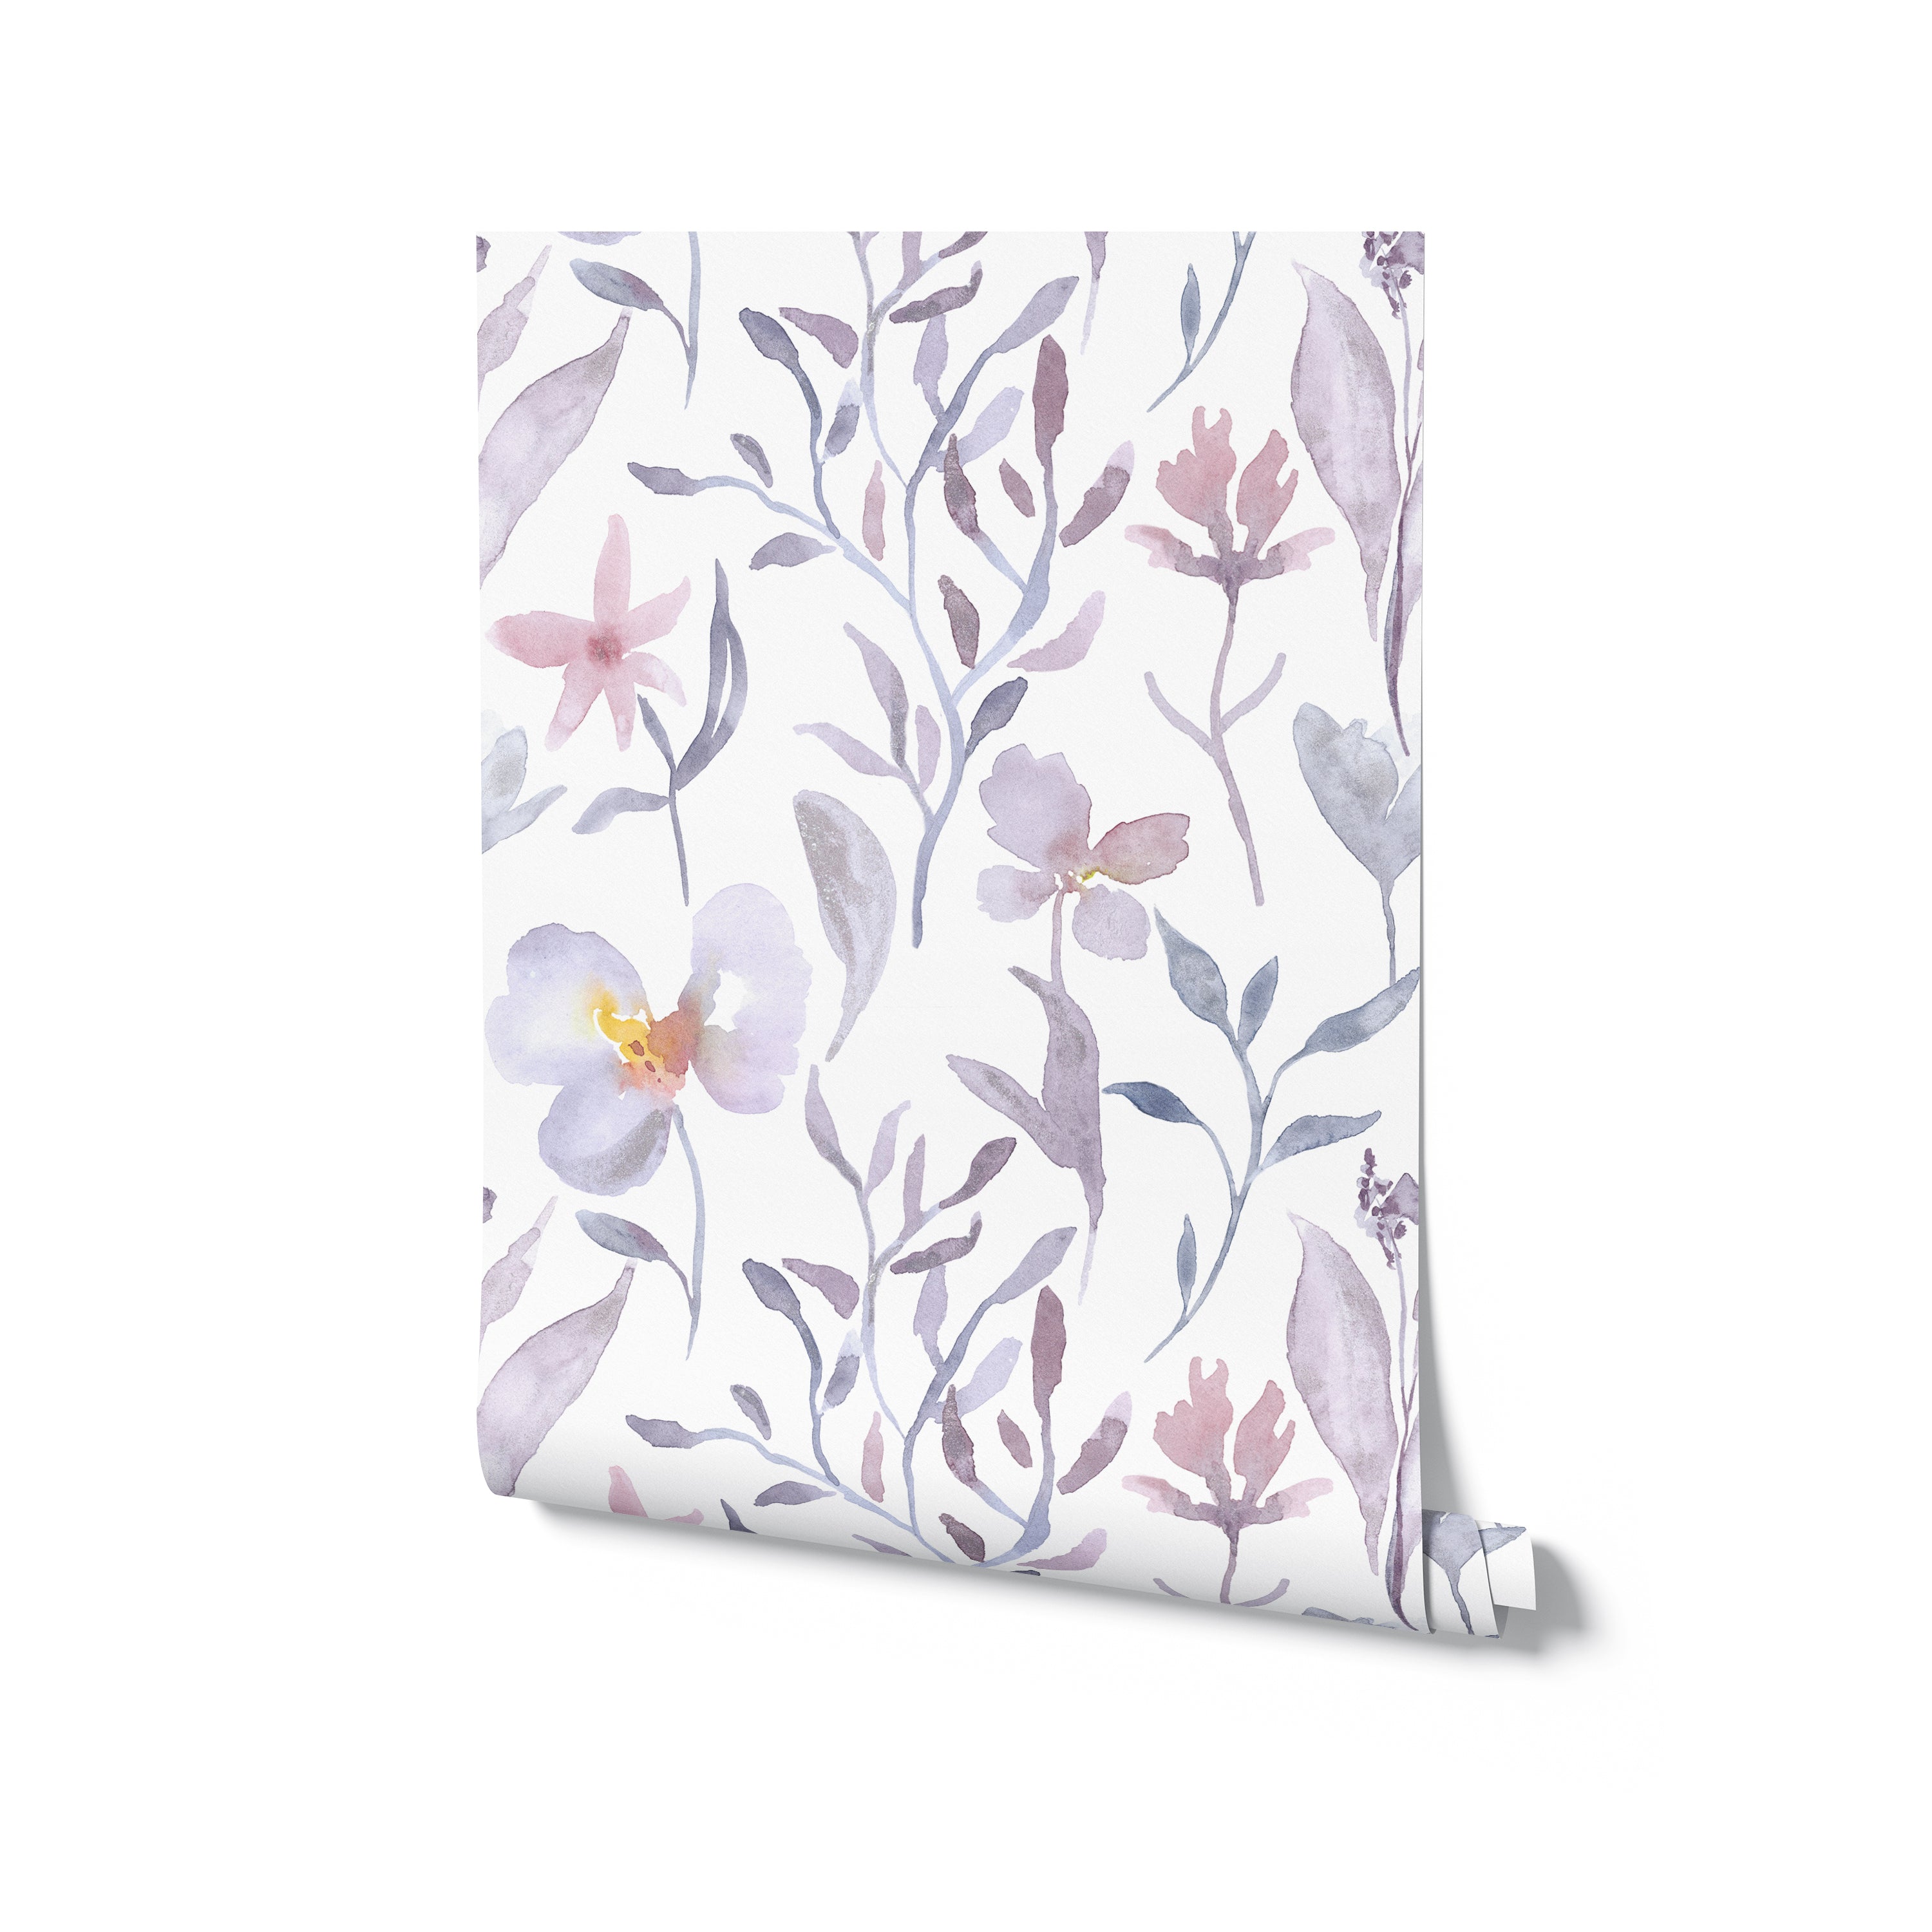 Roll of Watercolor Garden Wallpaper, slightly unrolled to reveal intricate watercolor floral patterns in shades of purple and pink with grey foliage on a white background. This wallpaper brings a fresh and artistic touch to any room, perfect for those looking to add a bit of nature-inspired elegance to their space